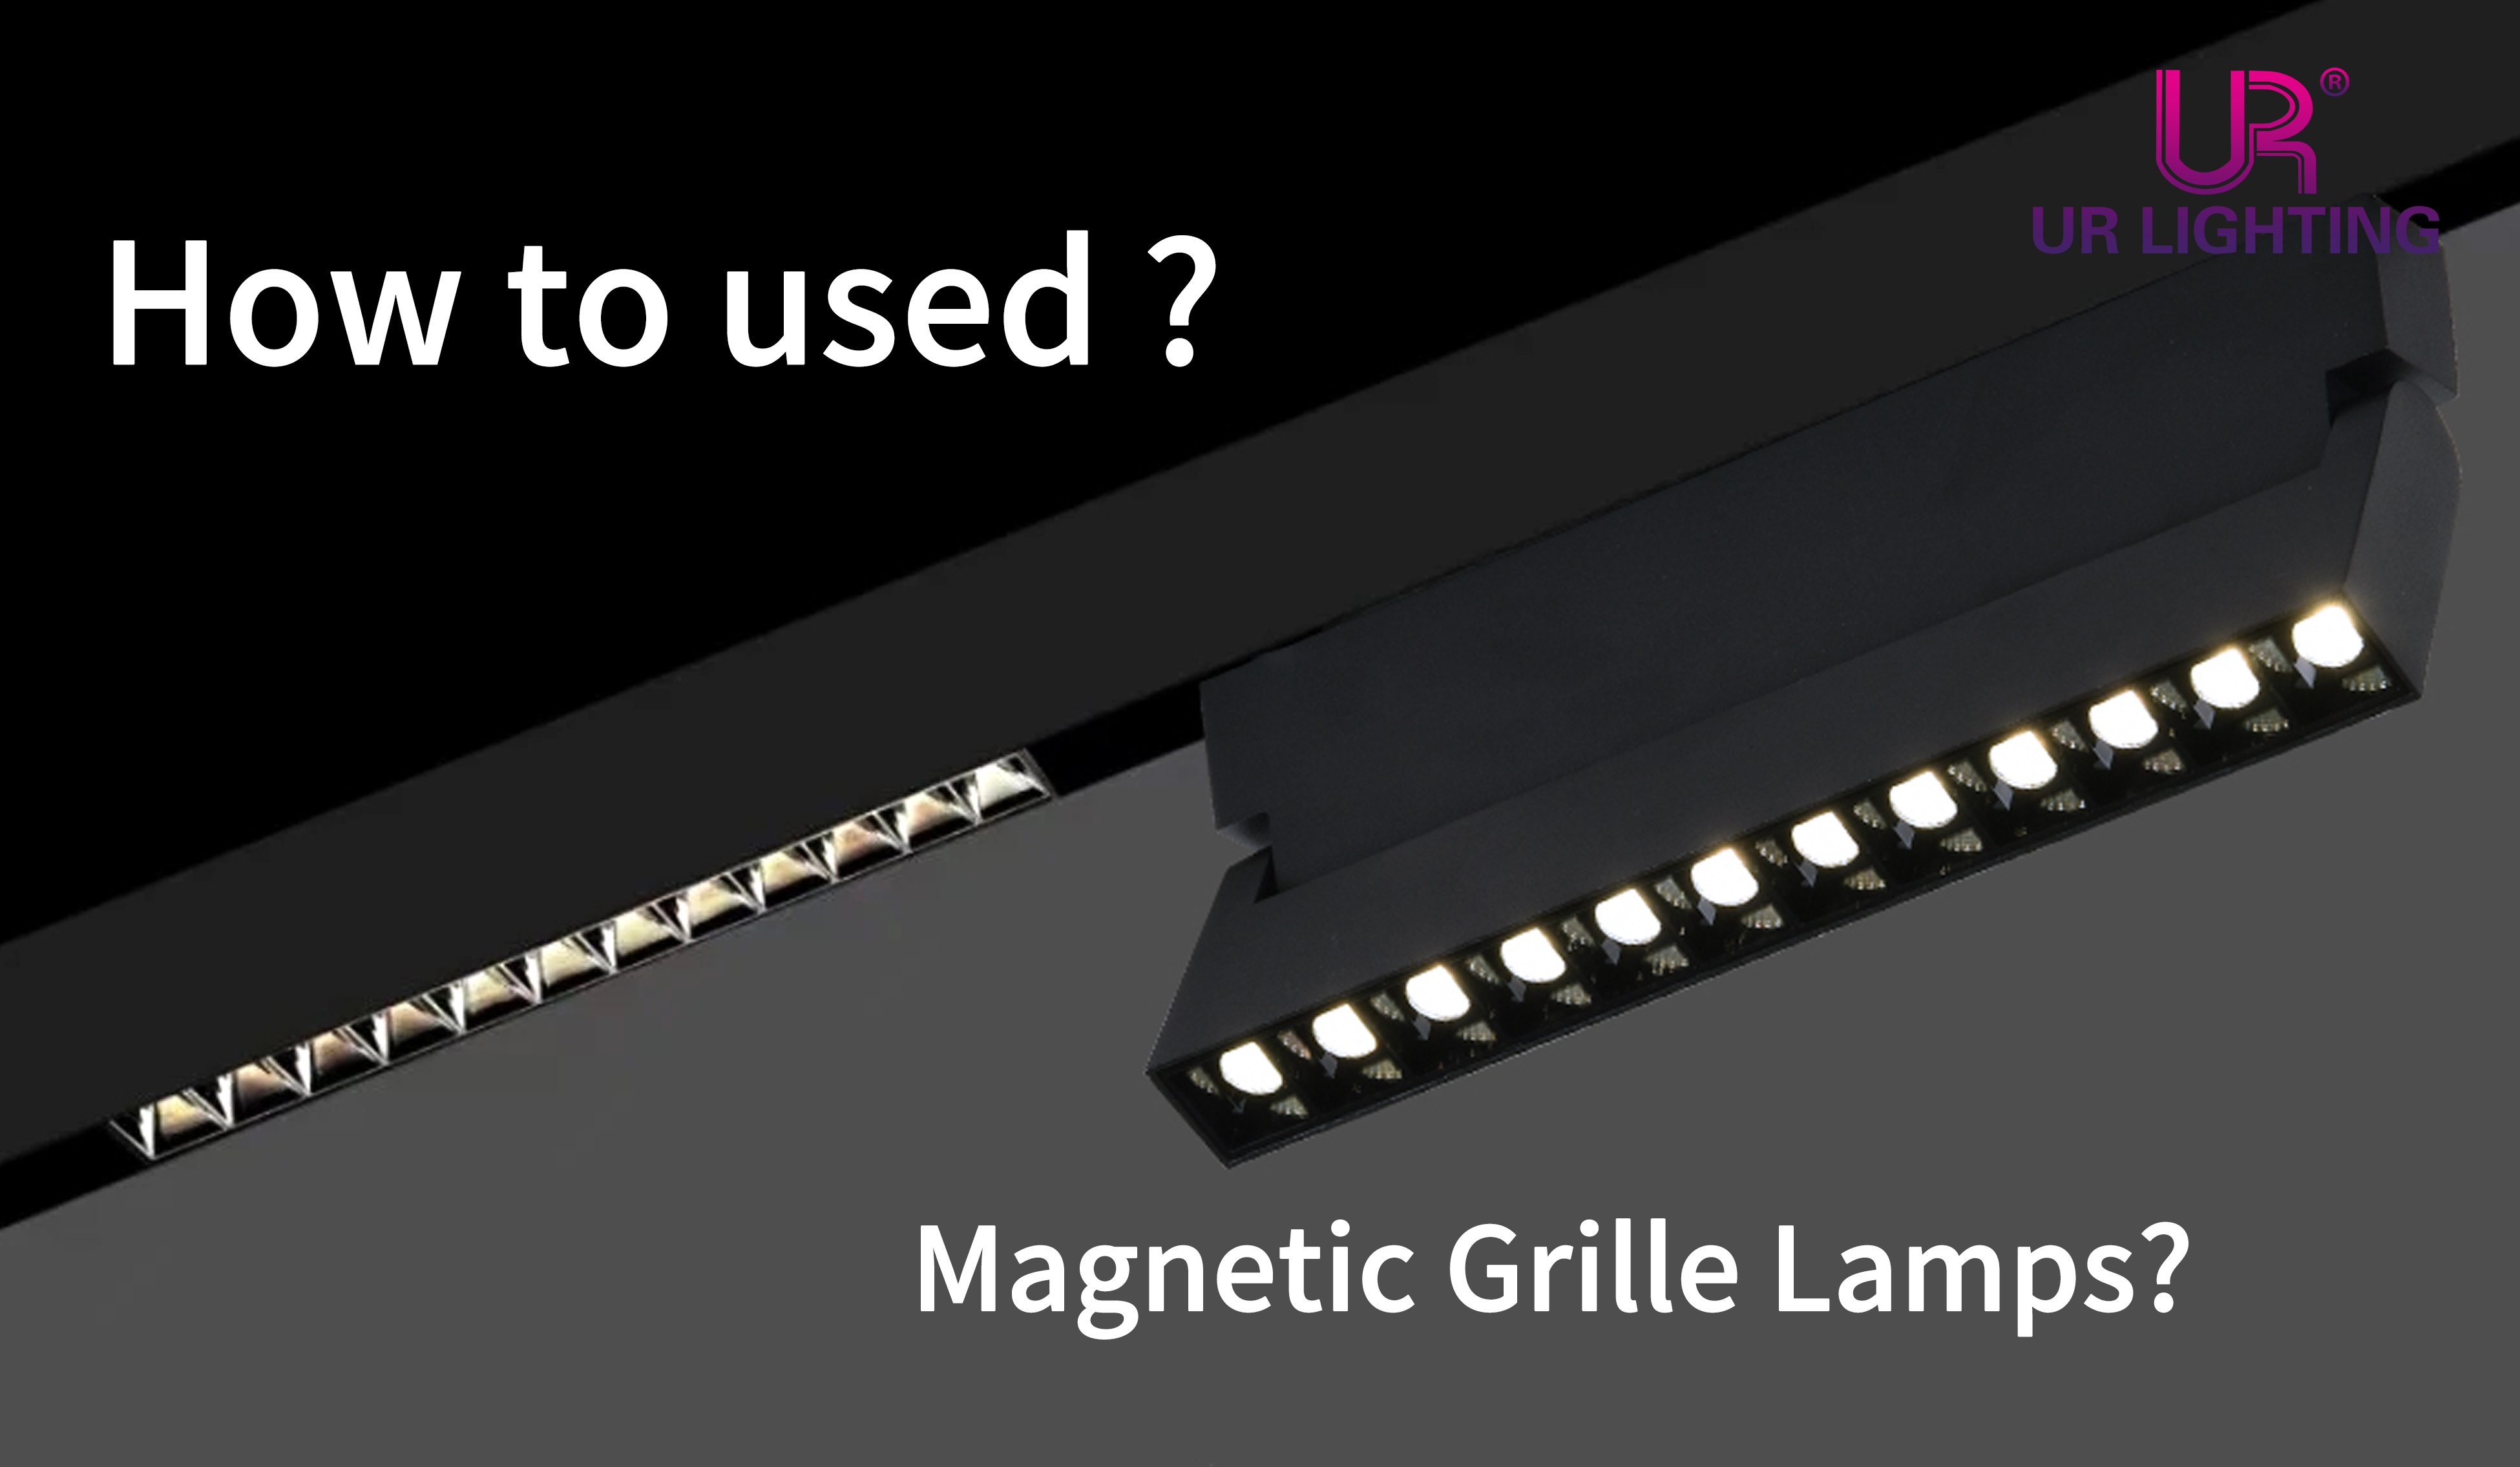 How to used the magnetic grille lamps?